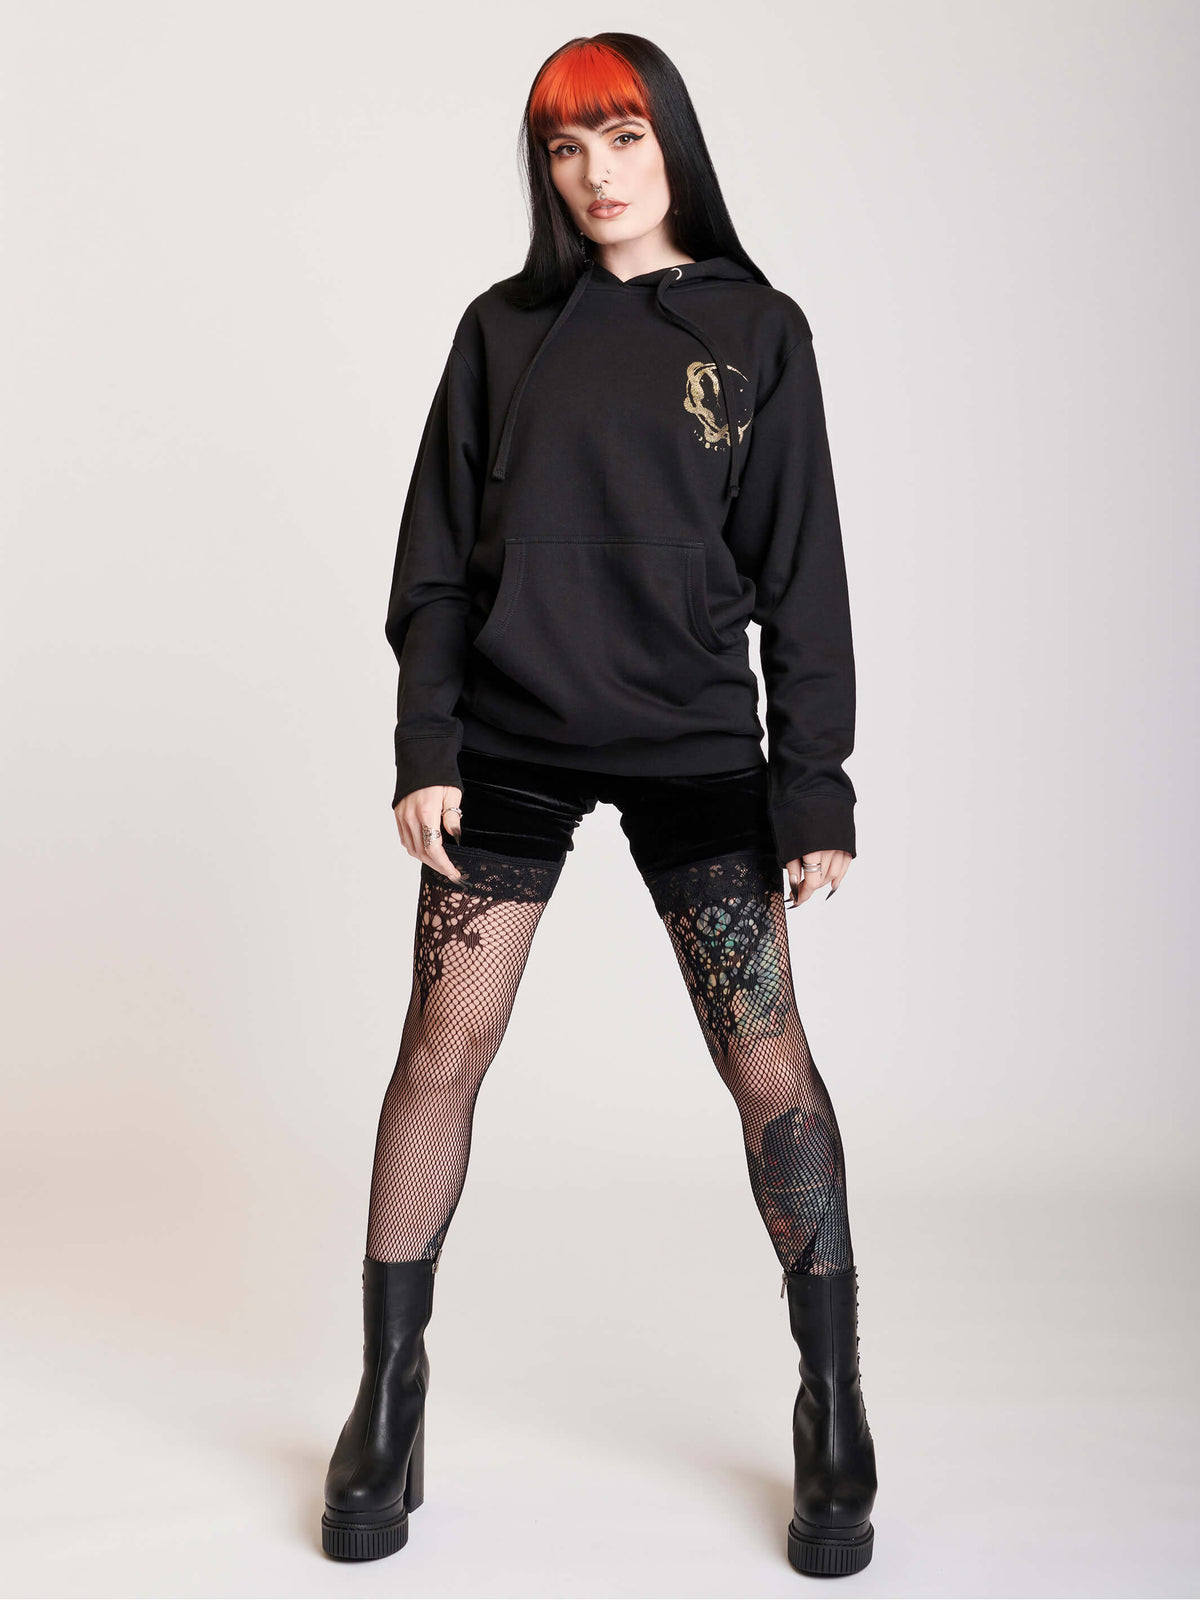 Black hoodie with gold moon tarot card graphic